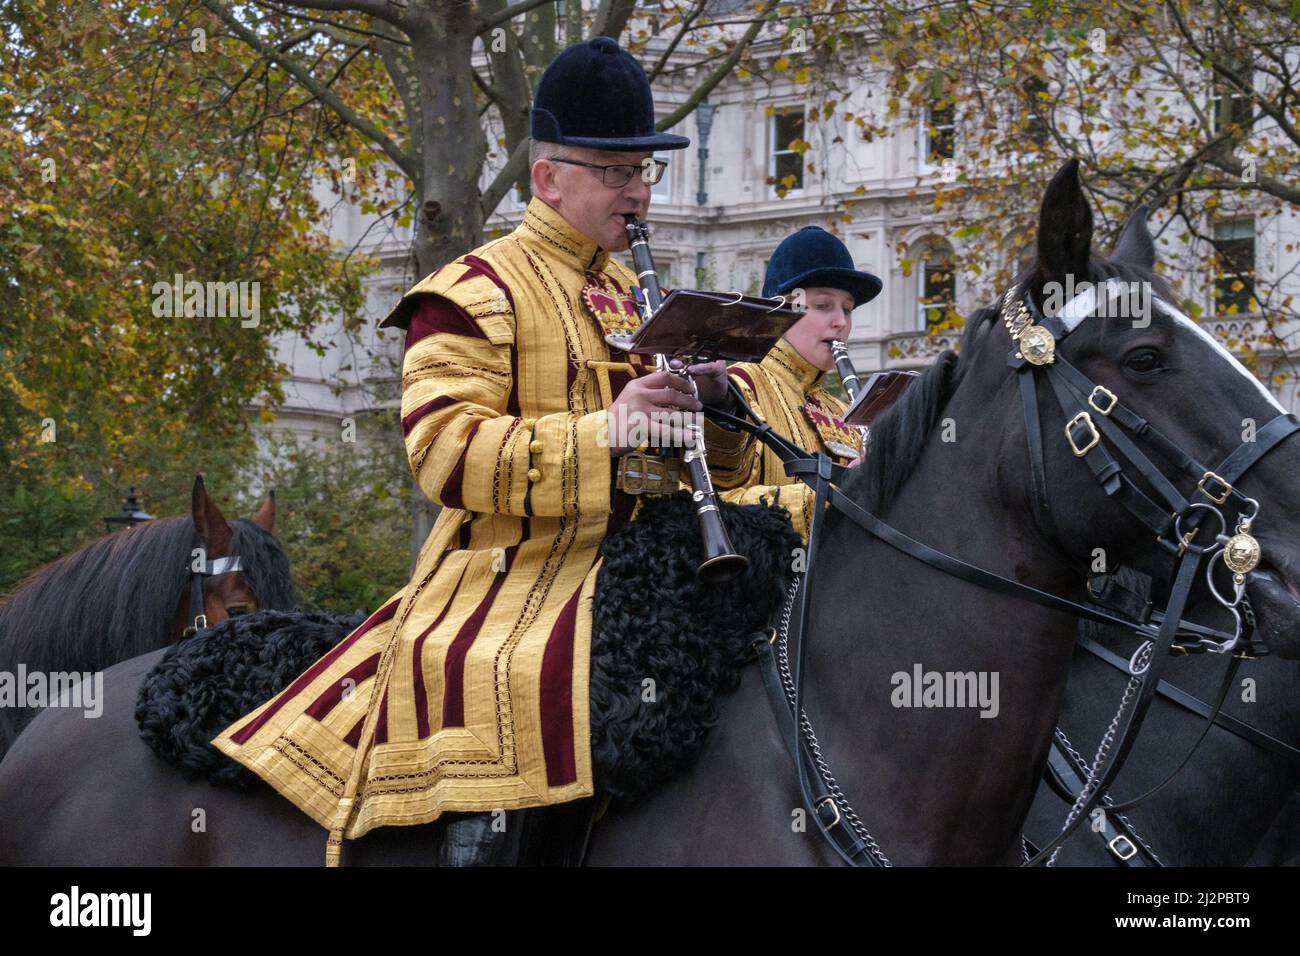 Close up of 2 members of The Band of The Household Cavalry playing clarinets on horseback at the Lord Mayor’s Show 2021 Victoria Embankment, London. Stock Photo